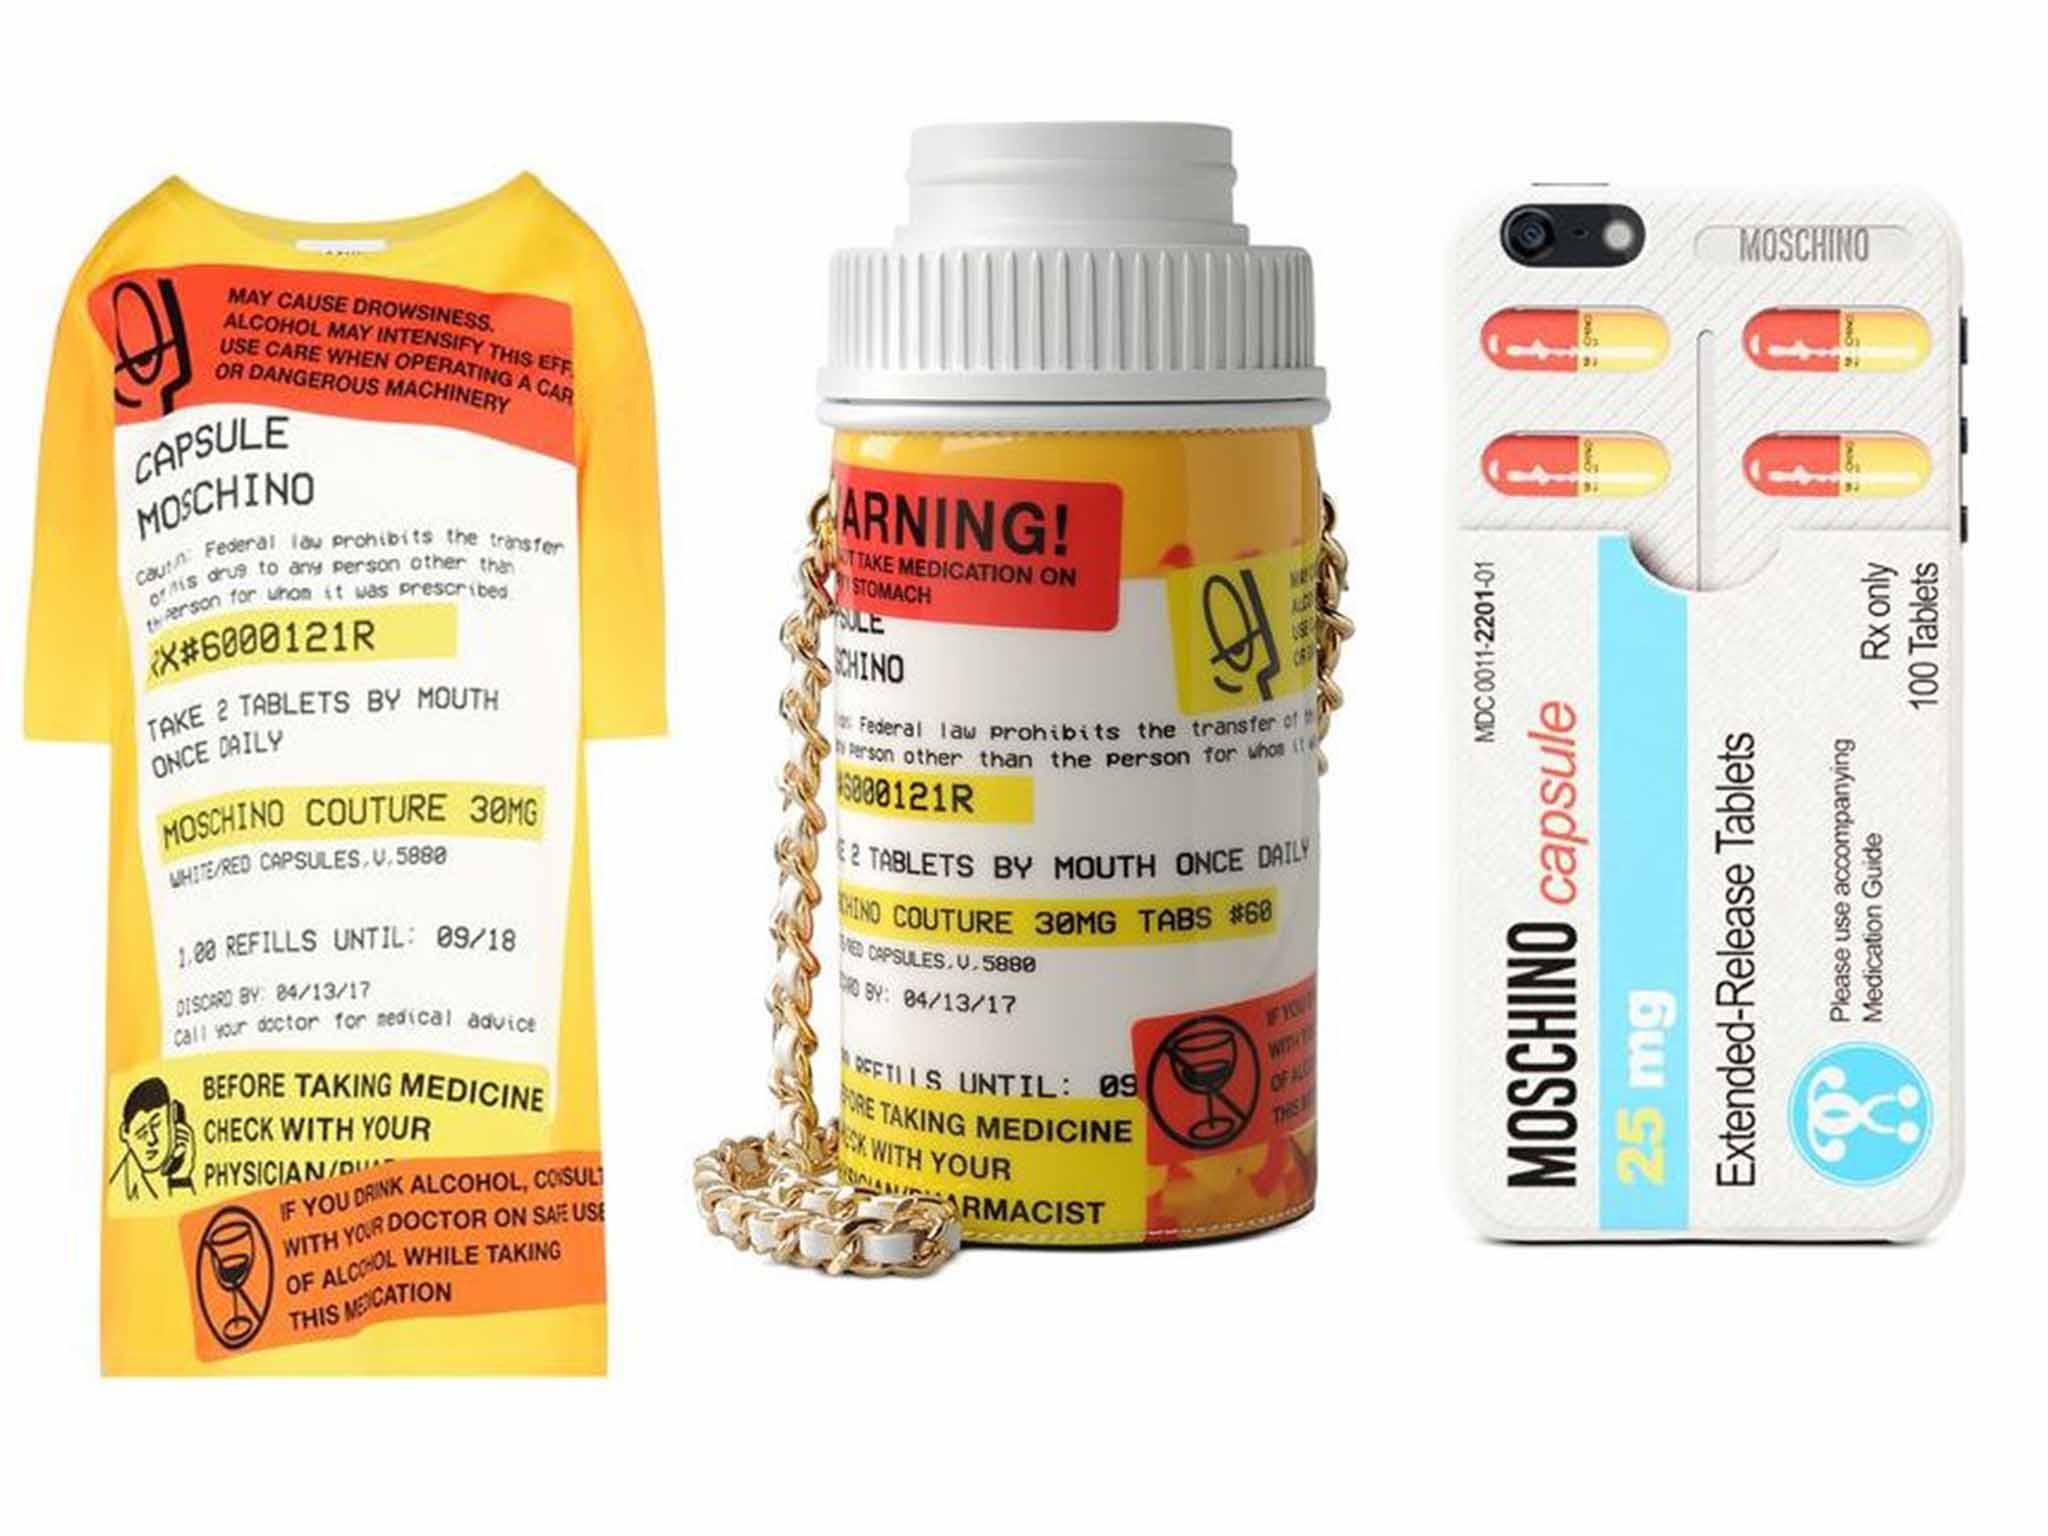 Moschino drug-themed collection pulled 